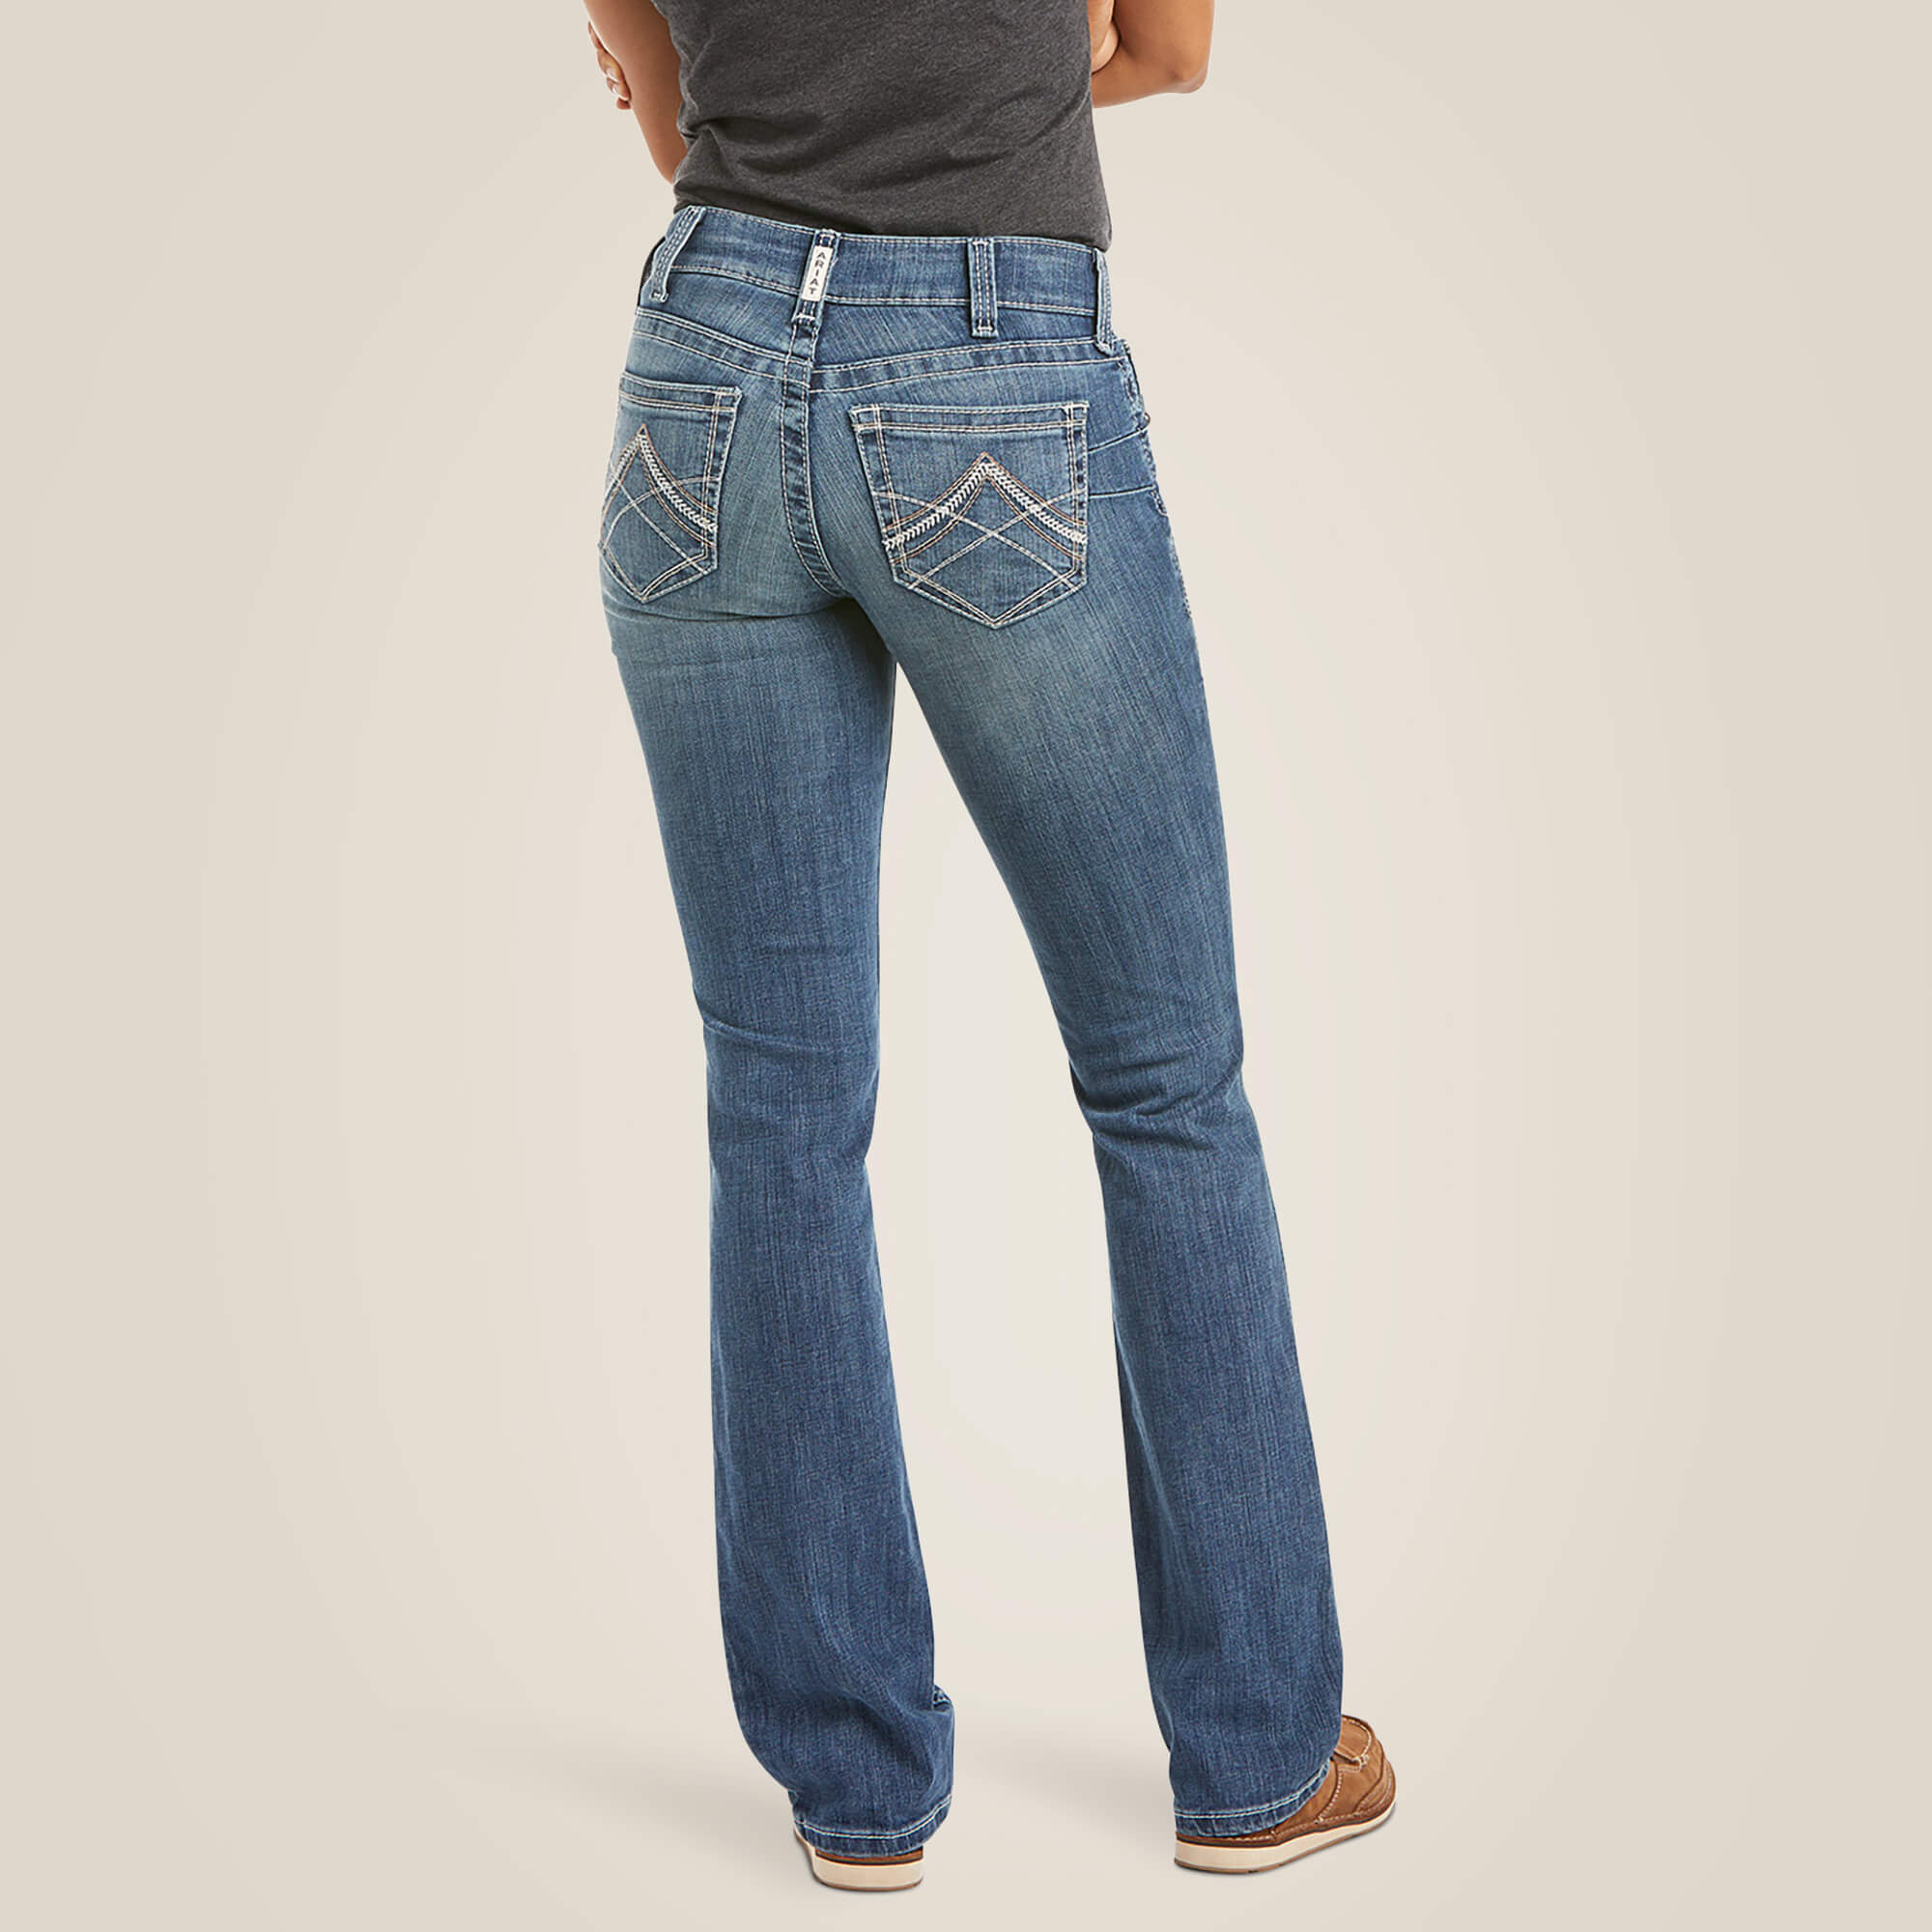 Jeans WMS REAL MID RISE STRETCH ICON STACKABLE STRAIGHT LEG JEAN RAINSTORM - Reitstiefel Kandel - Dein Reitshop